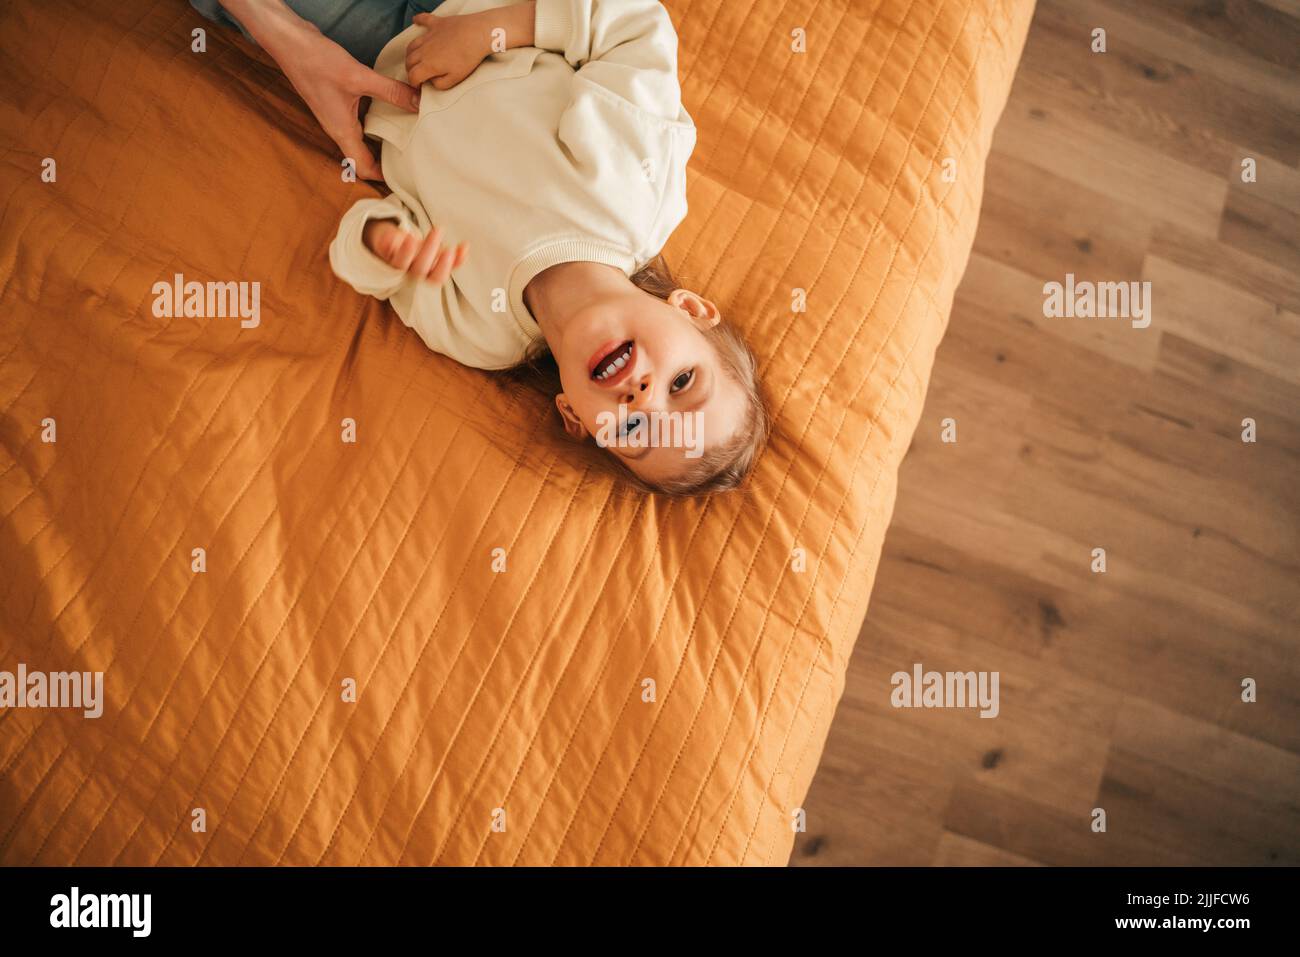 Child being put to bed by her parent Stock Photo